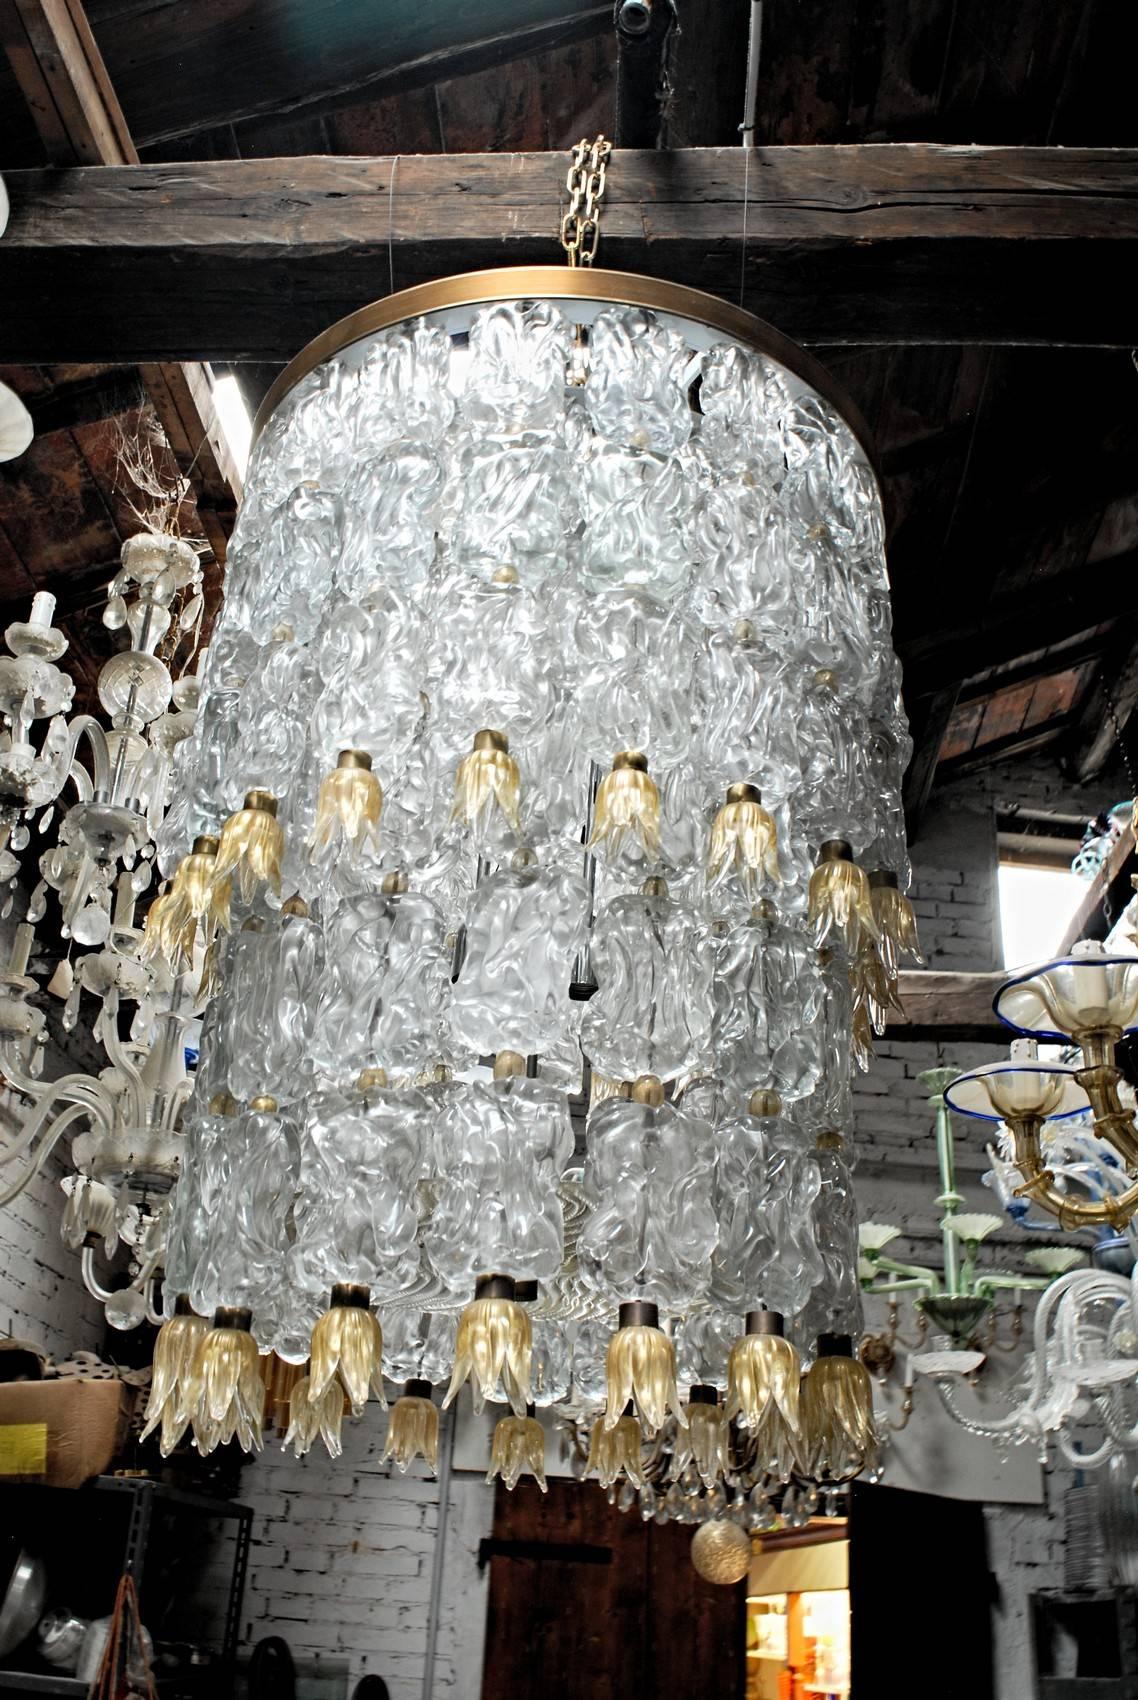 Art Glass Barovier and Toso, Glass Blocks with Gold Rosettes Chandelier, 1940 Hotel Gallia